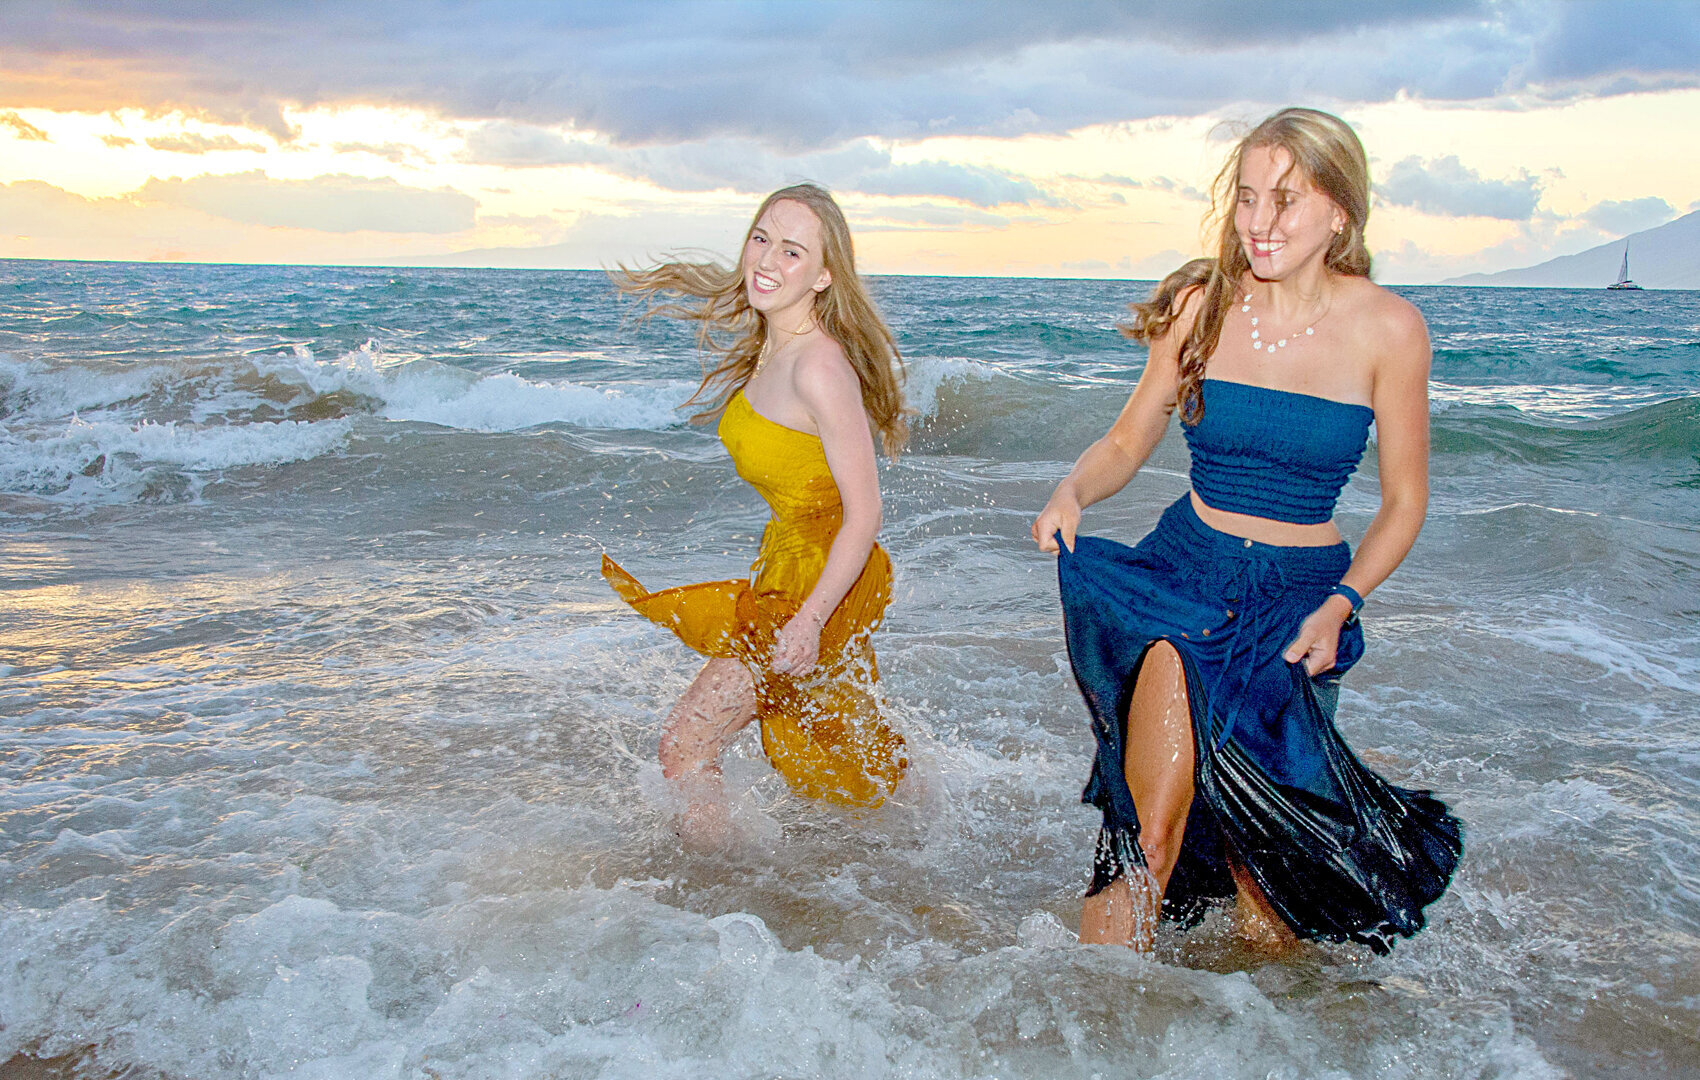 Getting very wet and lots of laughter in their blue and yellow dresses they bought for their photoshoot.